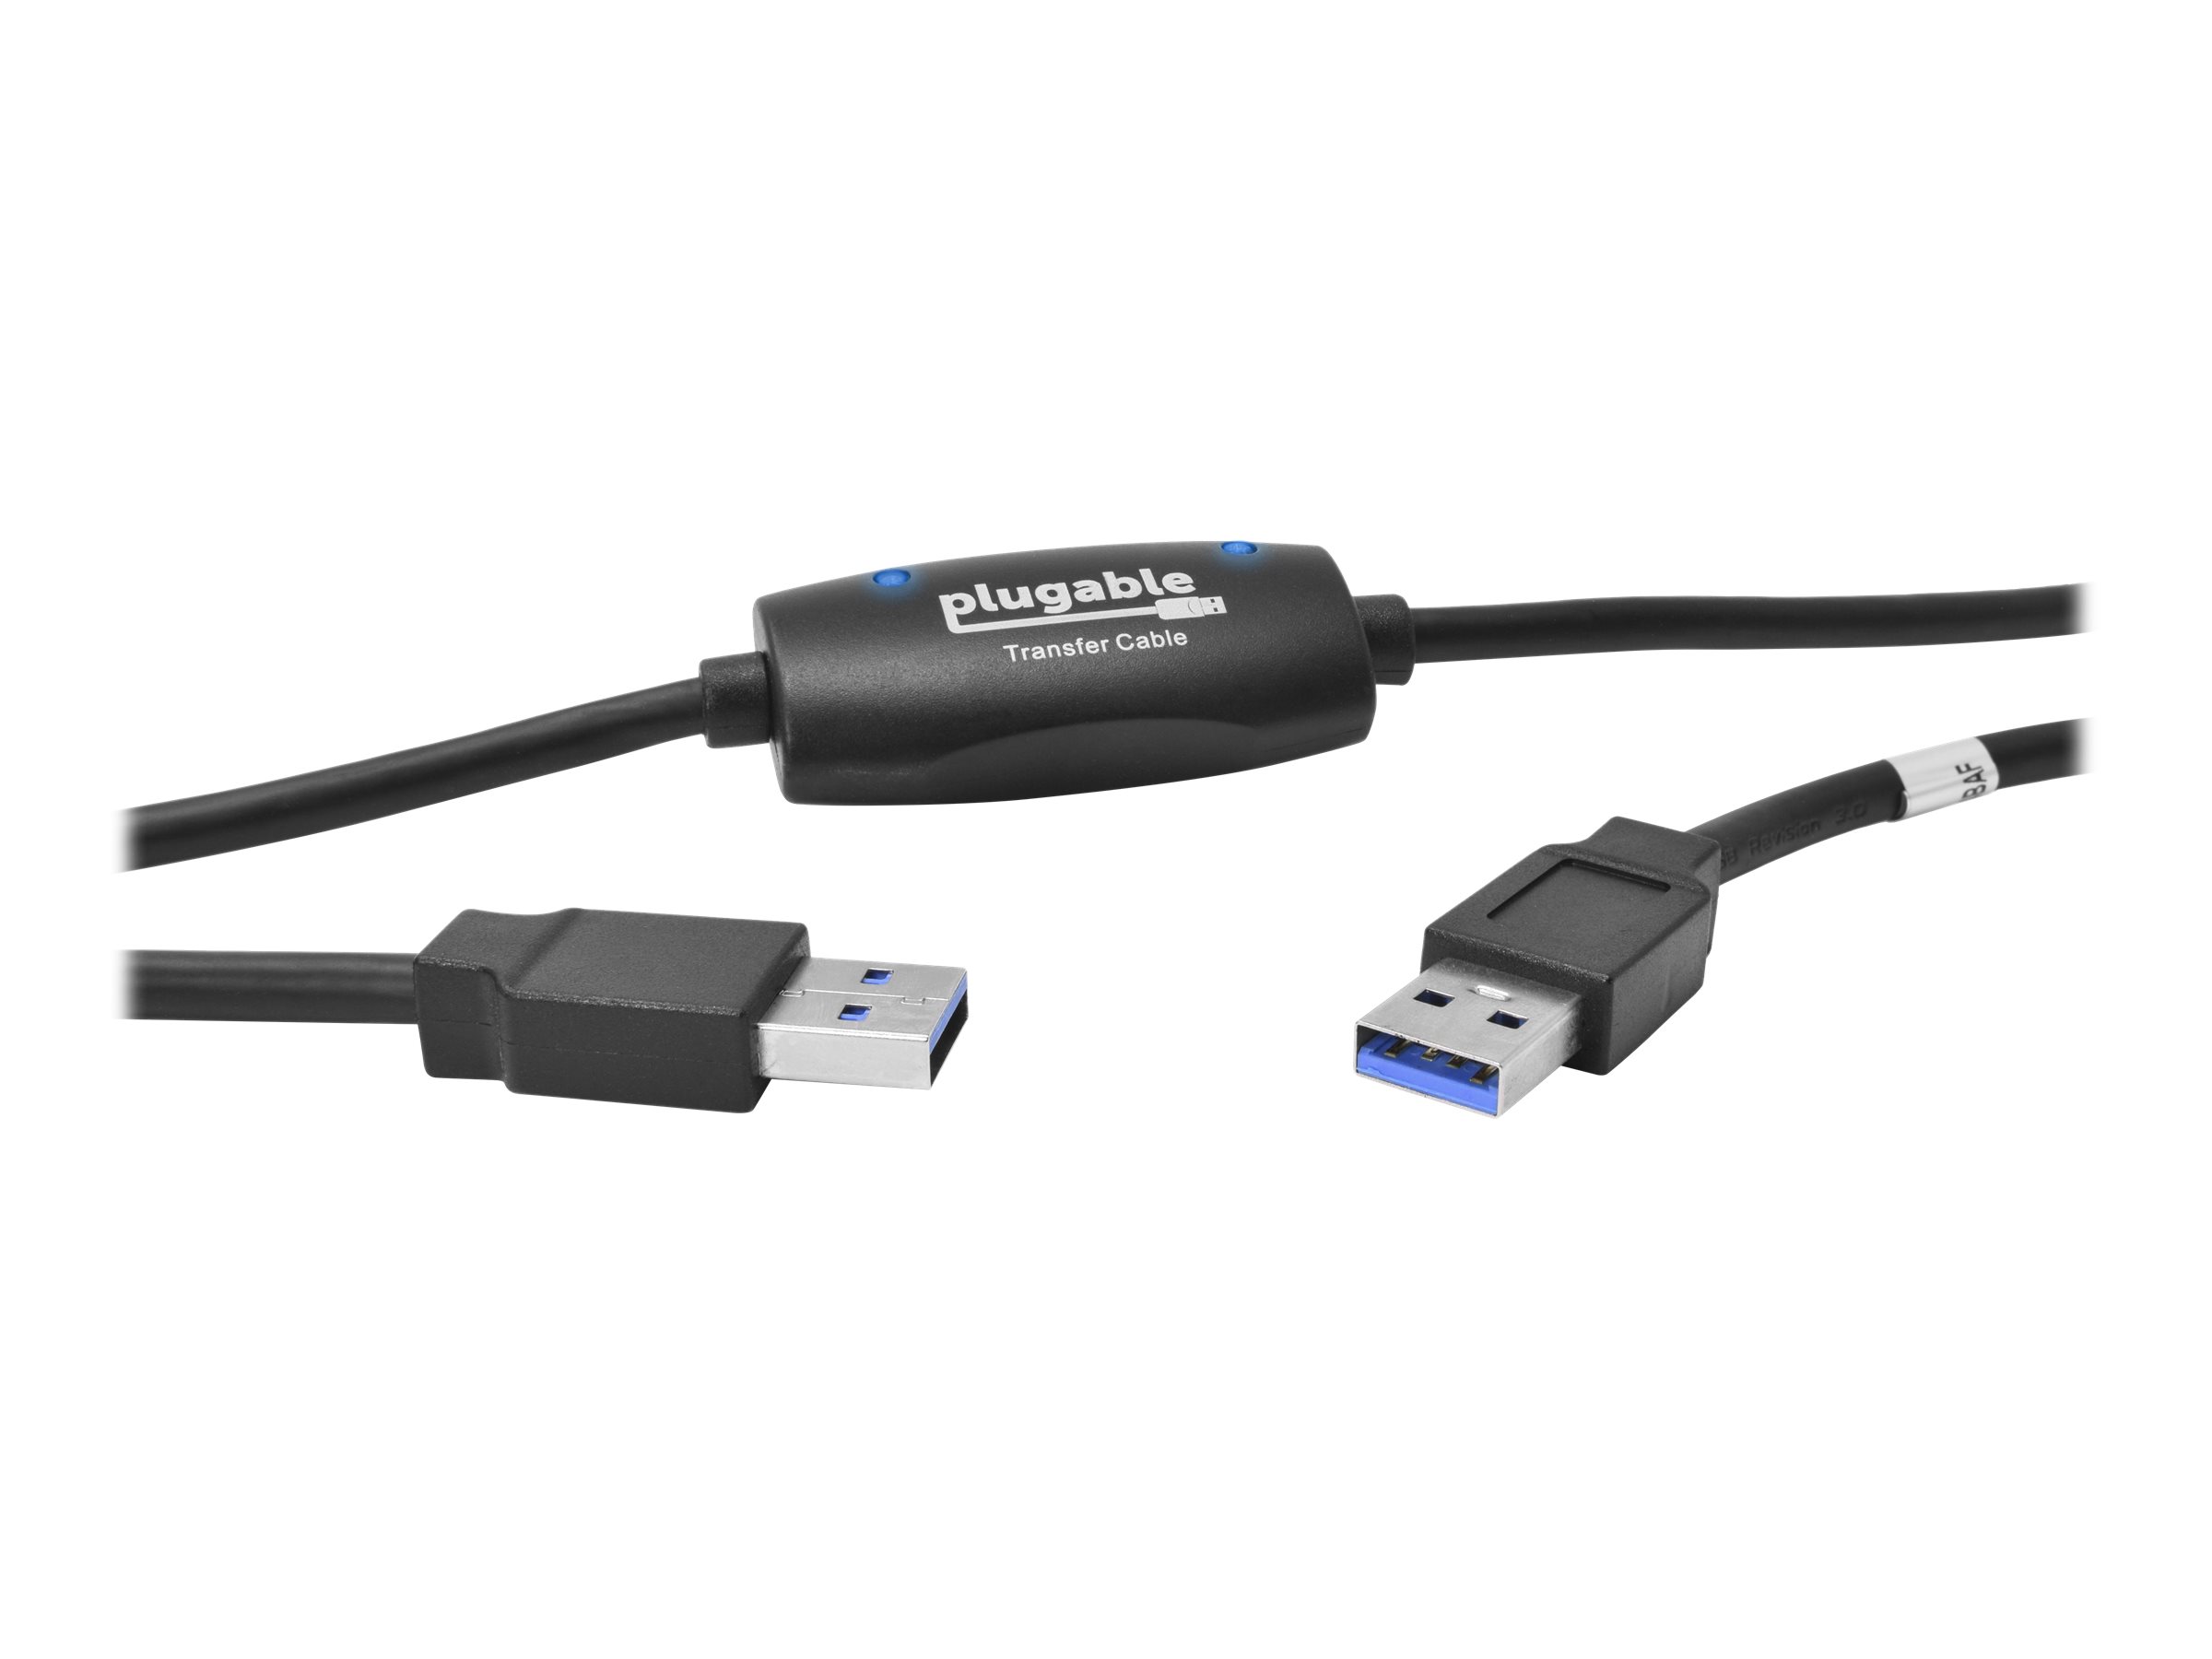 Plugable USB3-TRAN - Direct connect adapter